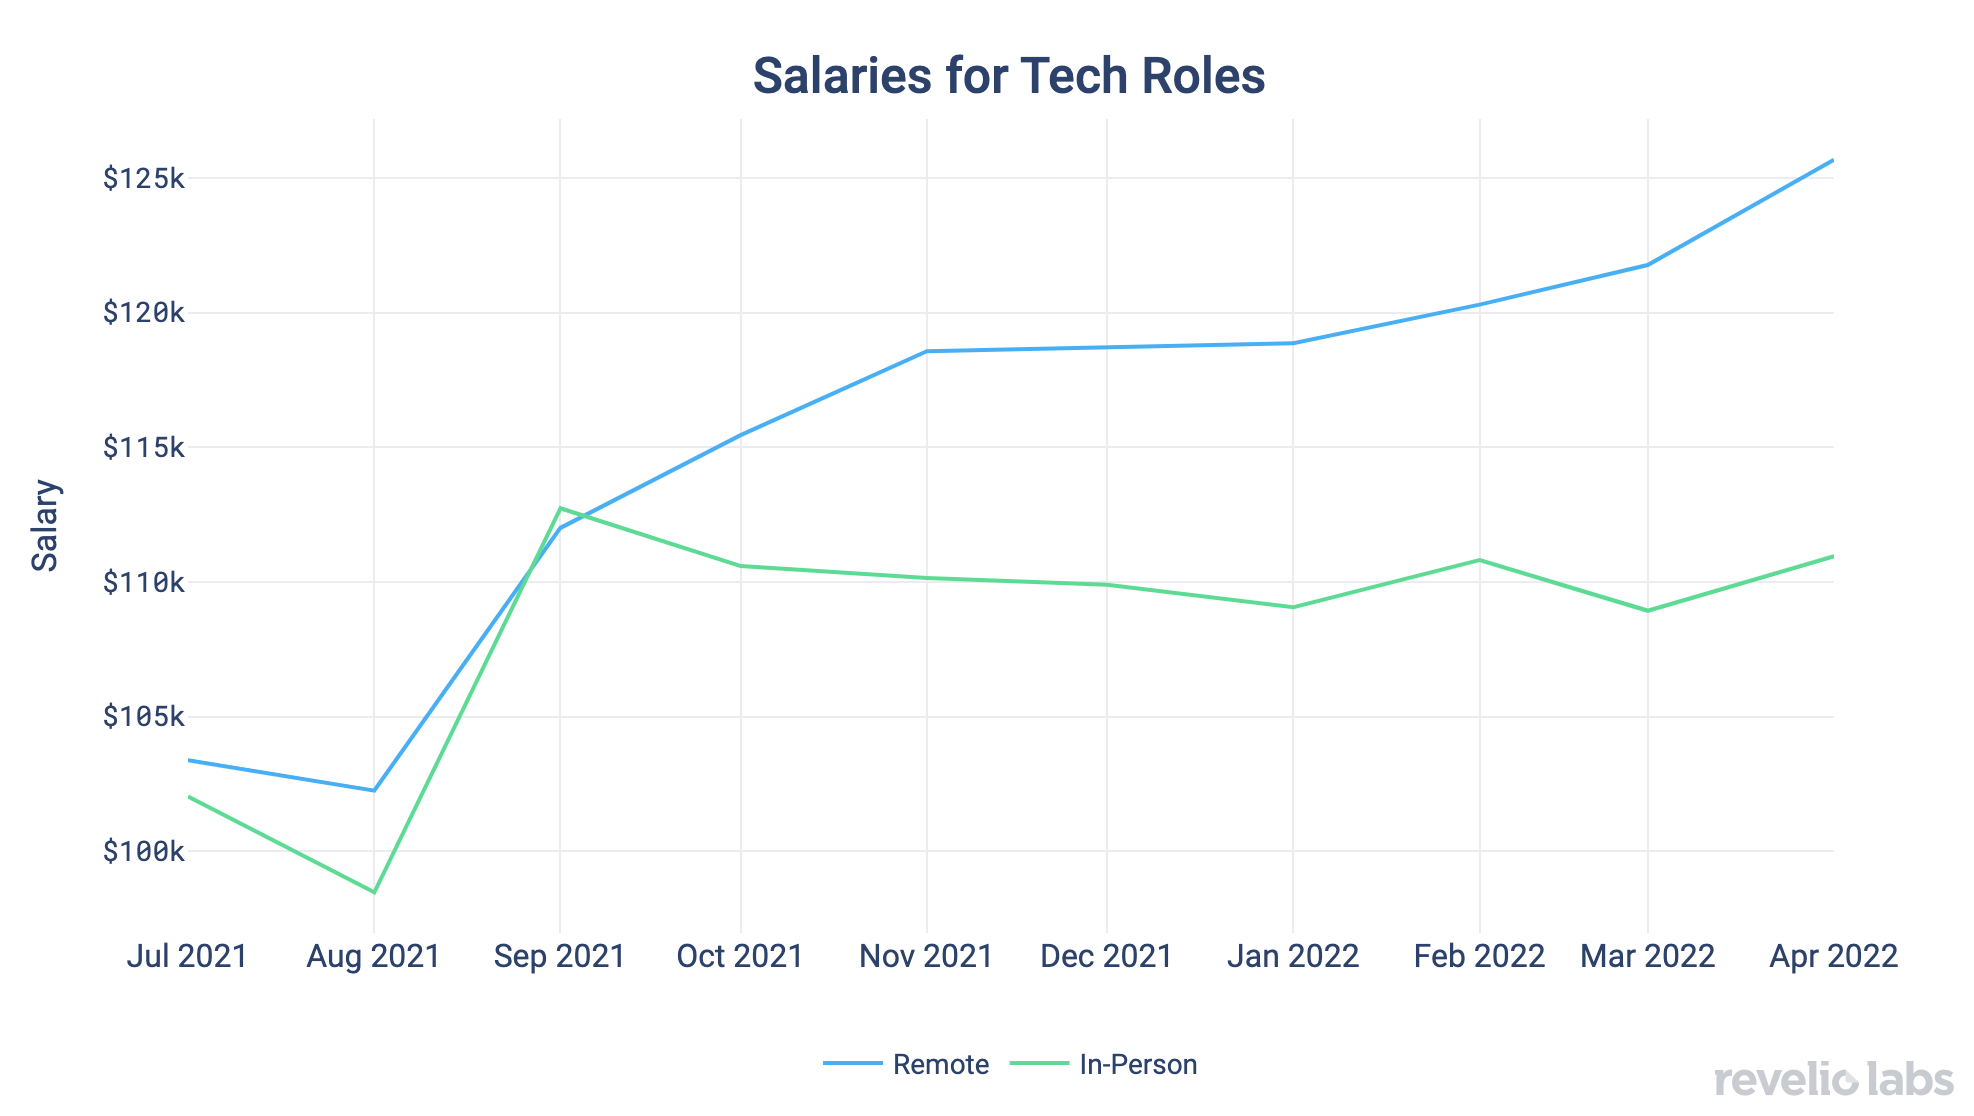 Salaries for Tech Roles